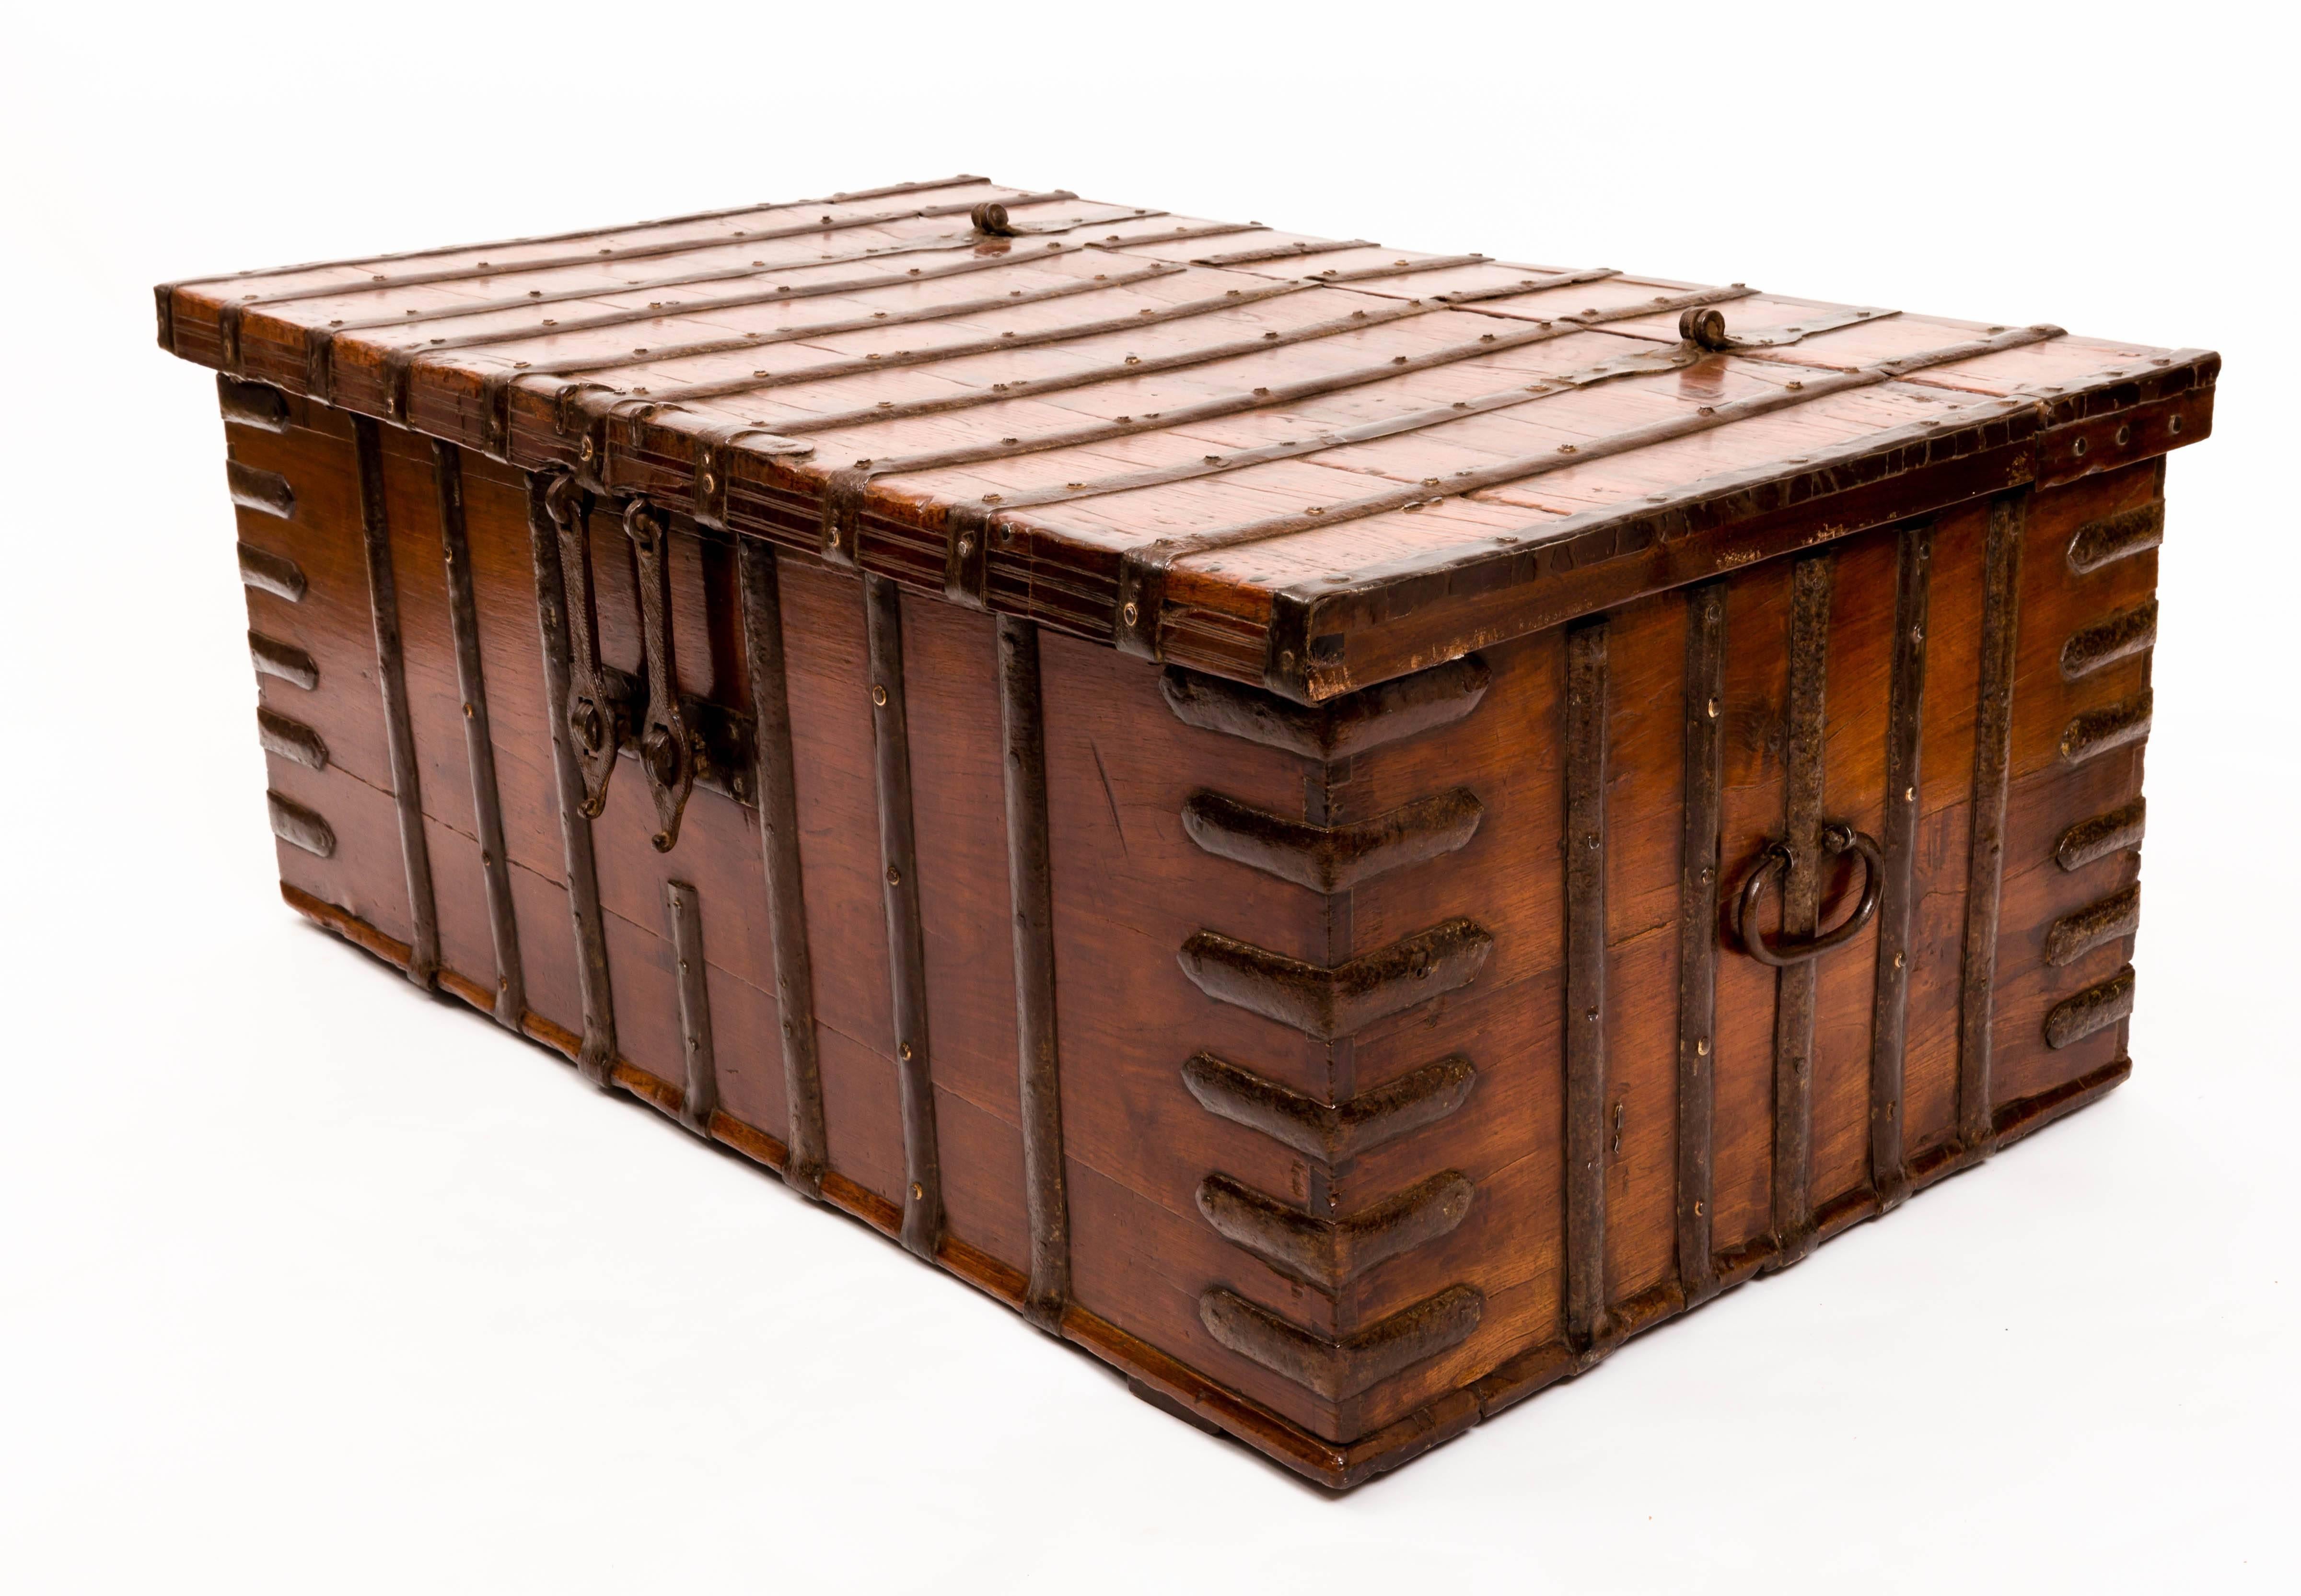 Iron-bound trunk with original iron carrying handles, hinges and double clasps. Good coffee table height.